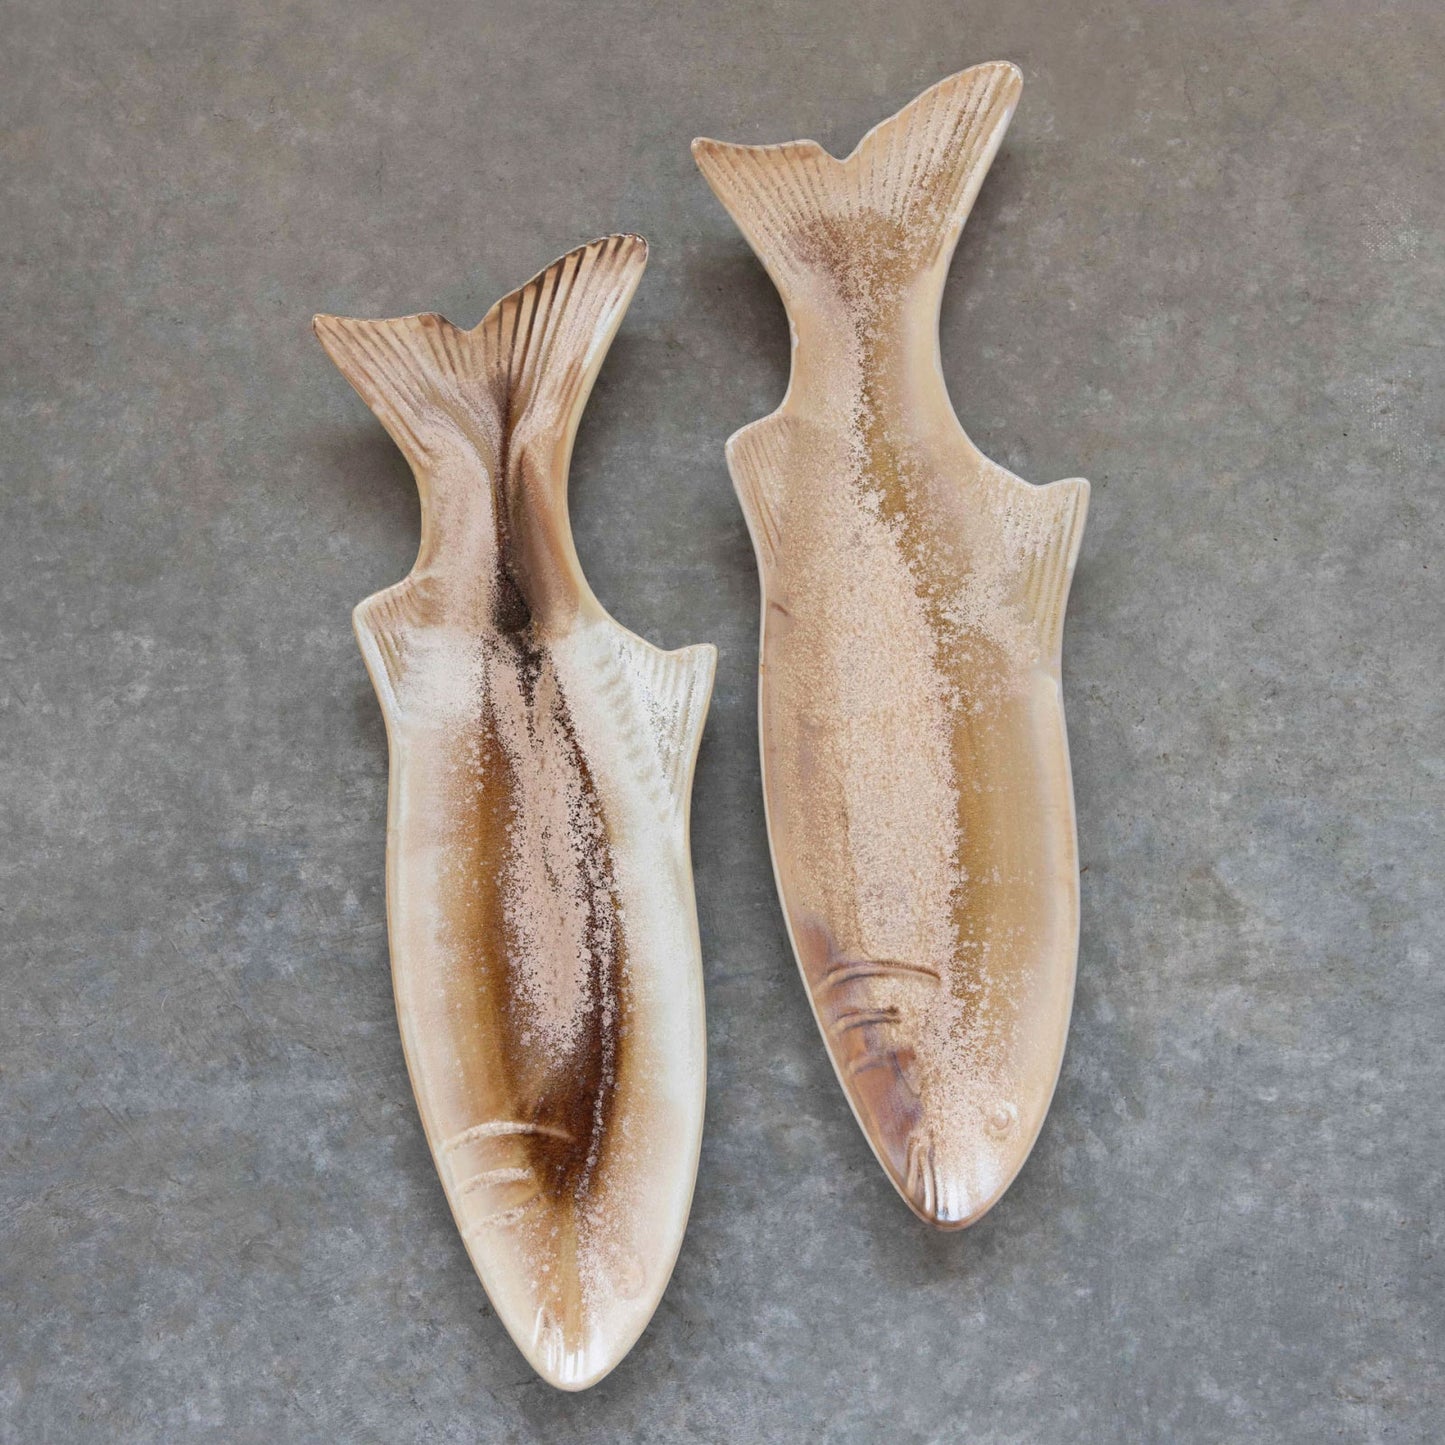 Stoneware Fish Shaped Dish with Reactive Glaze in Tan